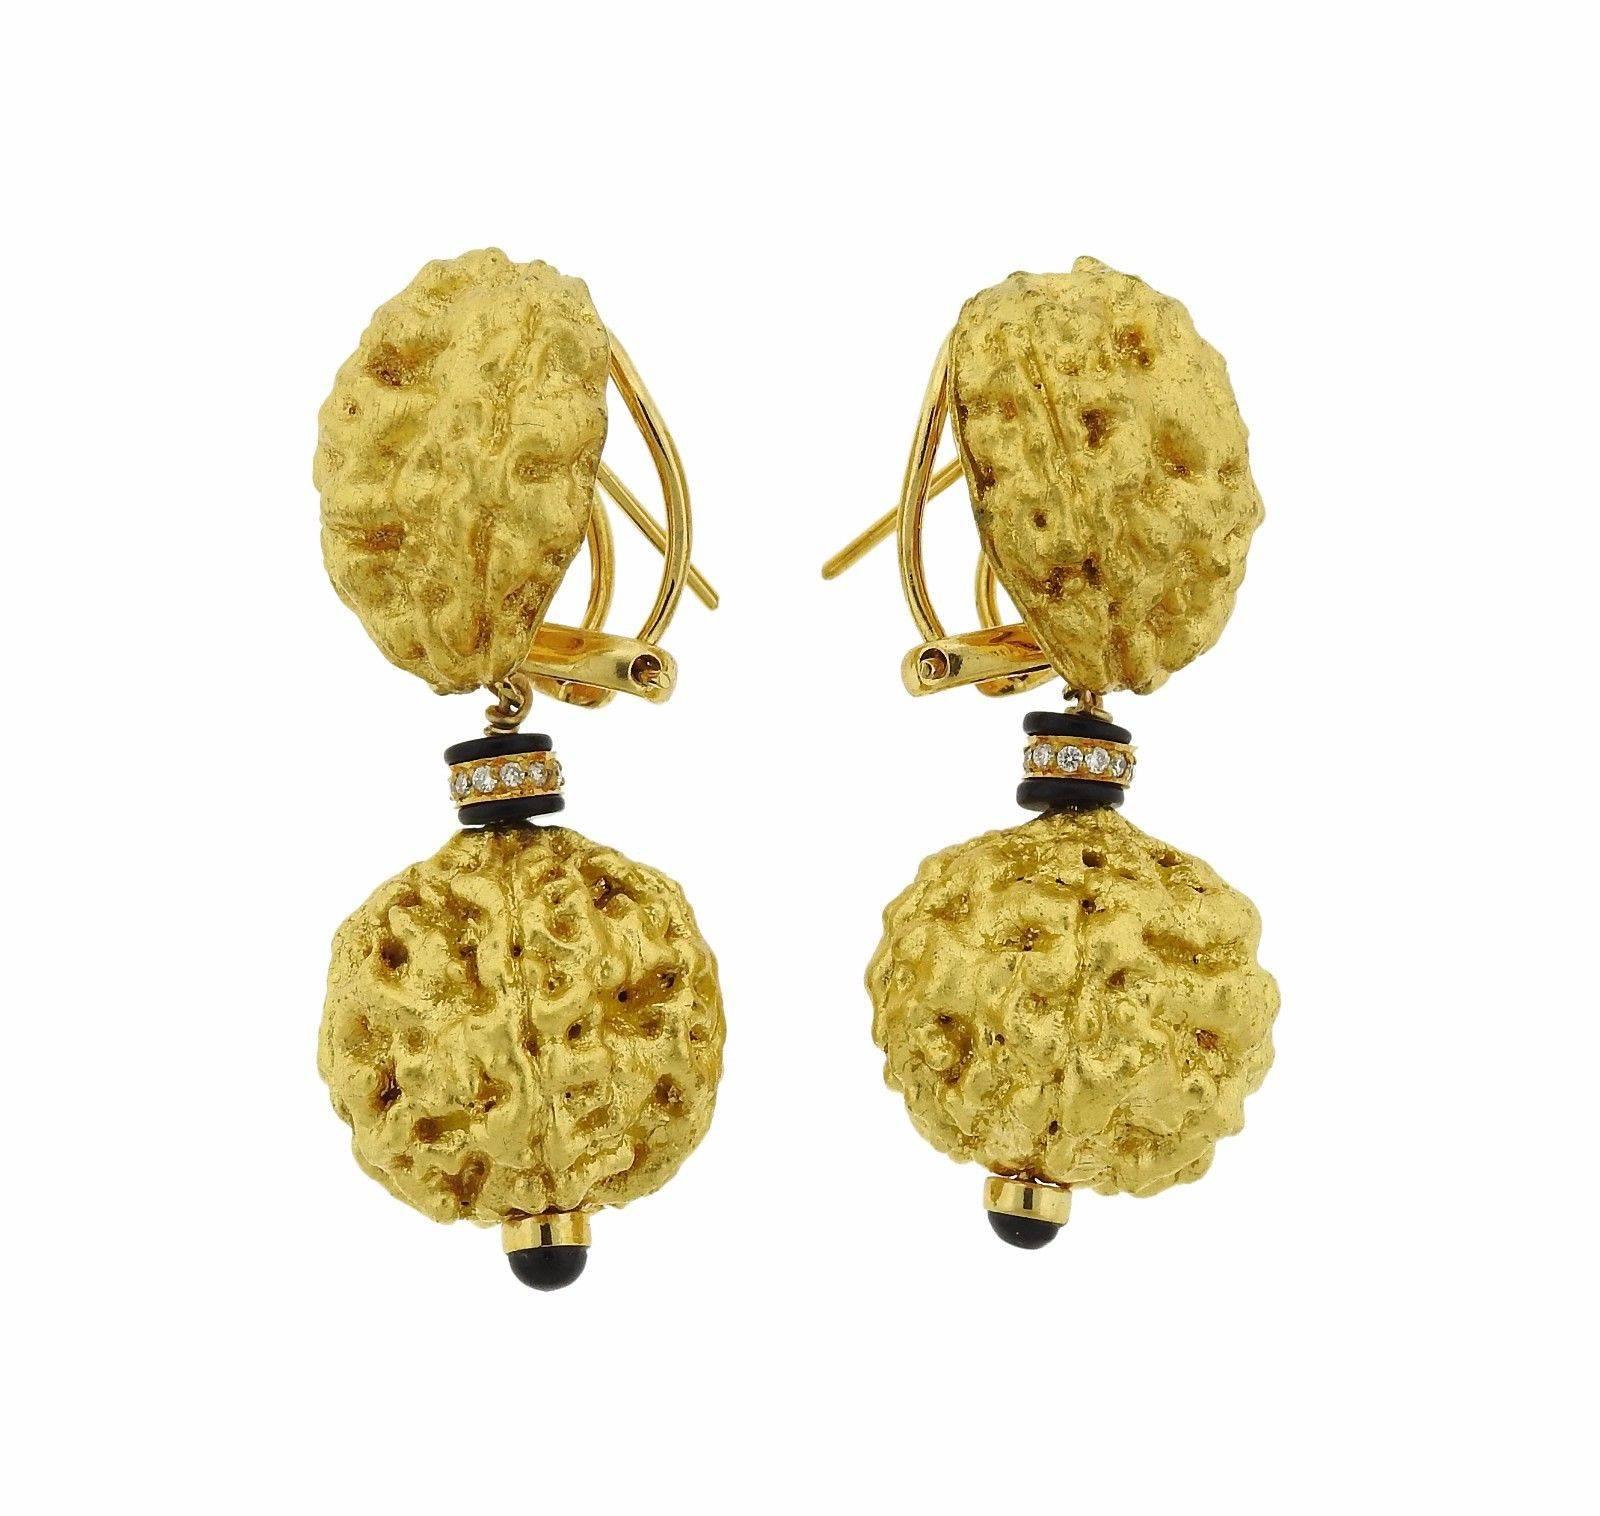 A pair of 18k yellow gold earrings set with onyx and approximately 0.10ctw of H/VS diamonds.  The earrings are 46mm x 20mm , with collapsible posts.  The pair weighs 19 grams.  Marked with the maker's mark, 18k, 01, 509.